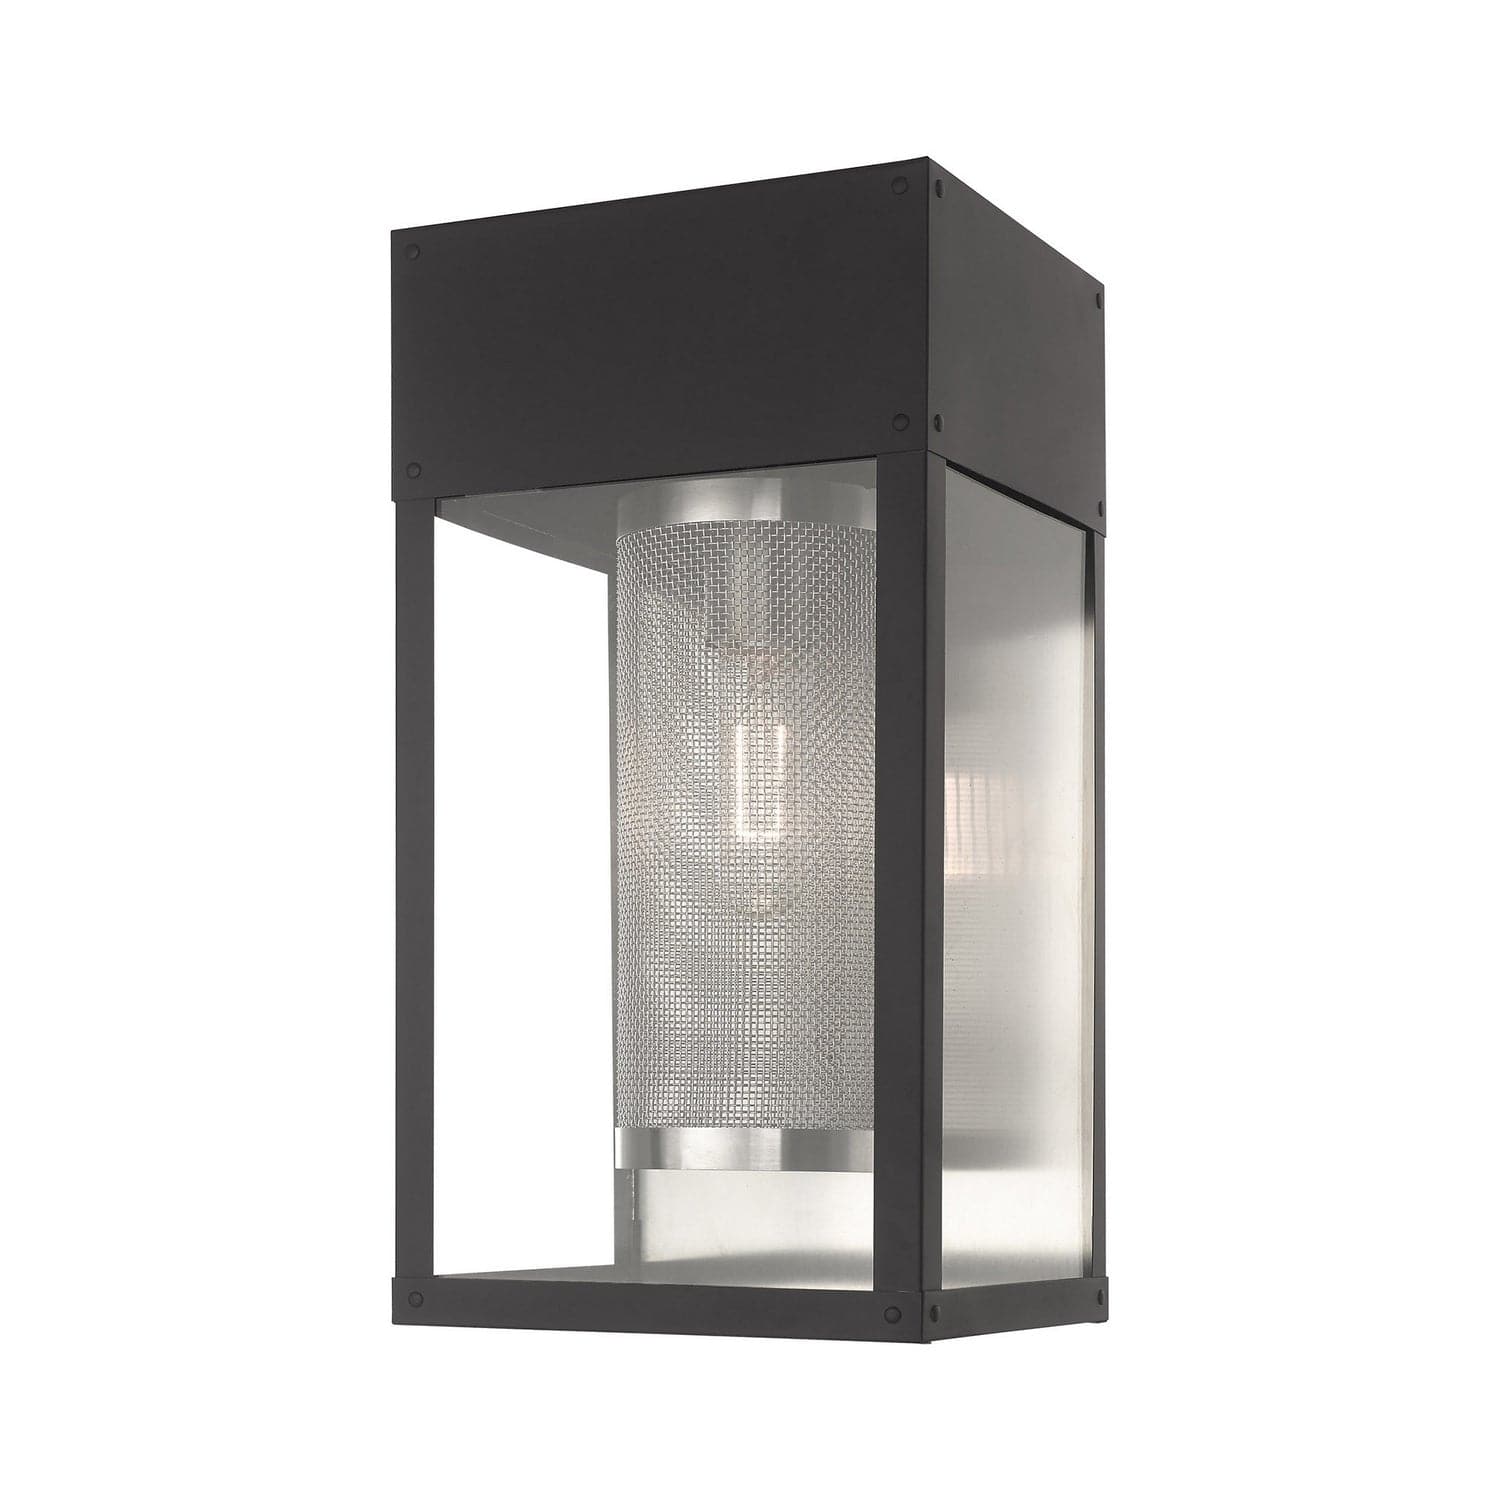 Livex Lighting - 20762-04 - One Light Outdoor Wall Lantern - Franklin - Black w/ Brushed Nickel Stainless Steel